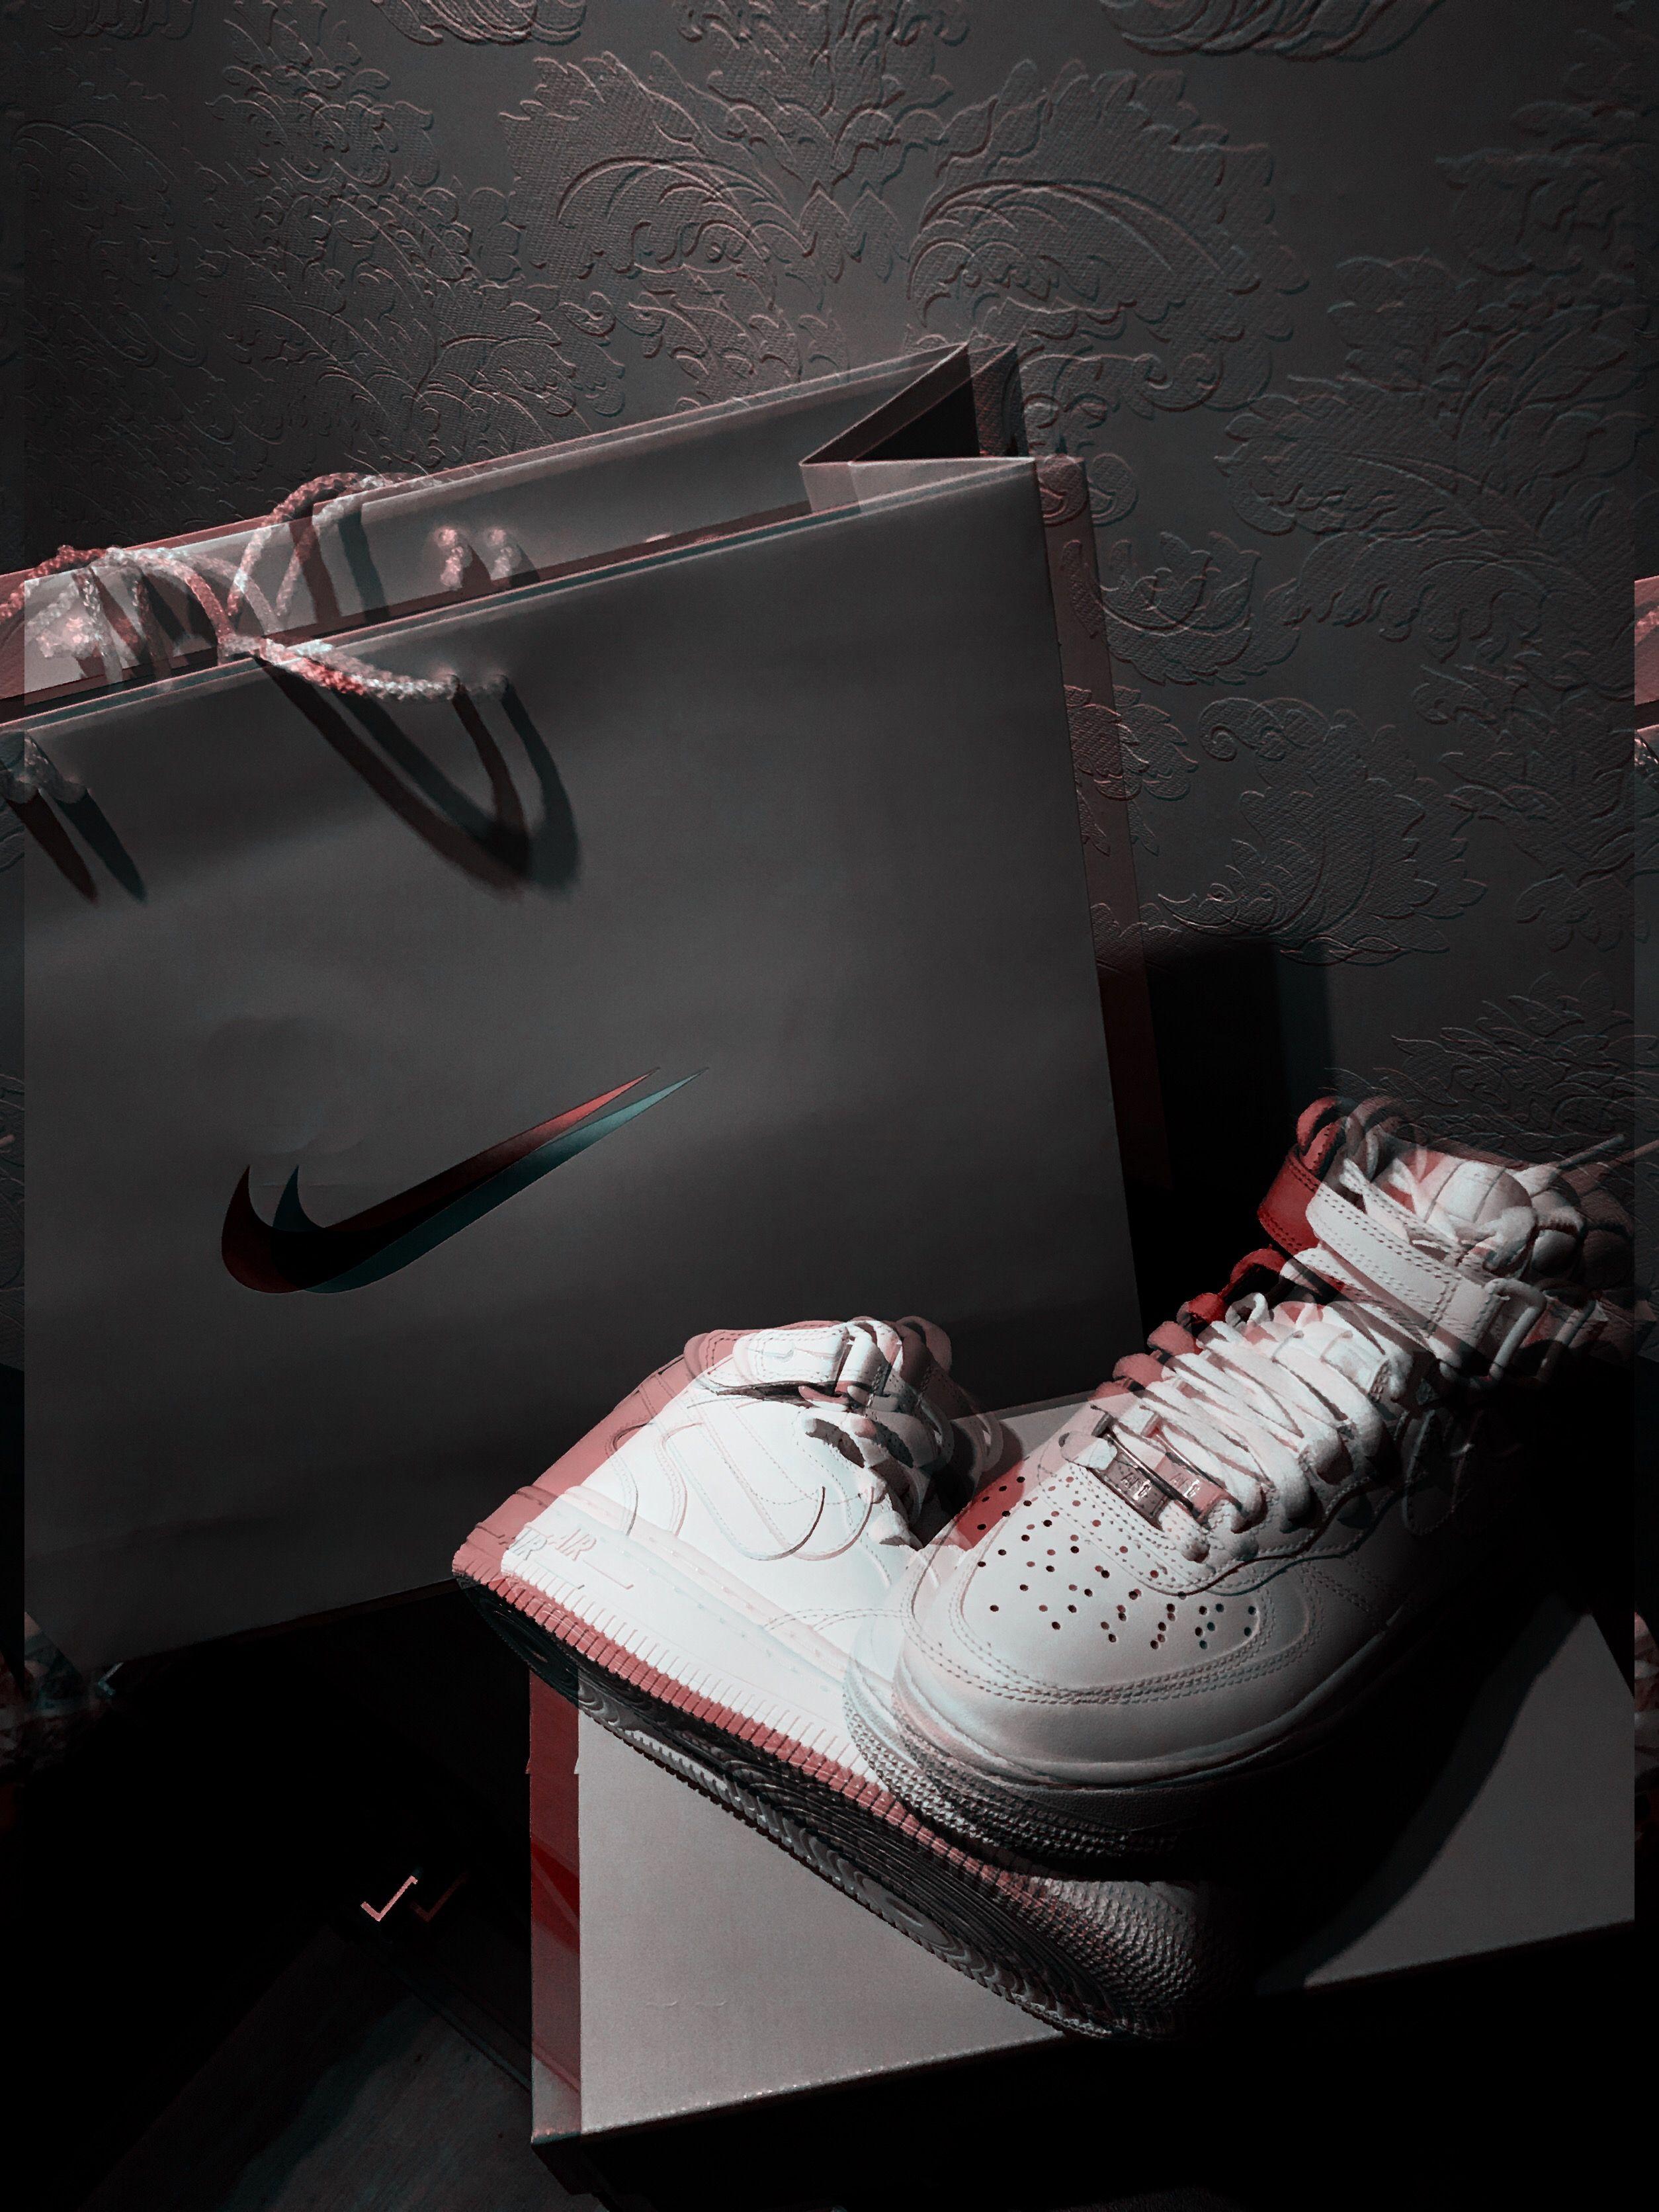 Free download nike air force 1 Wallpapers Combat boots